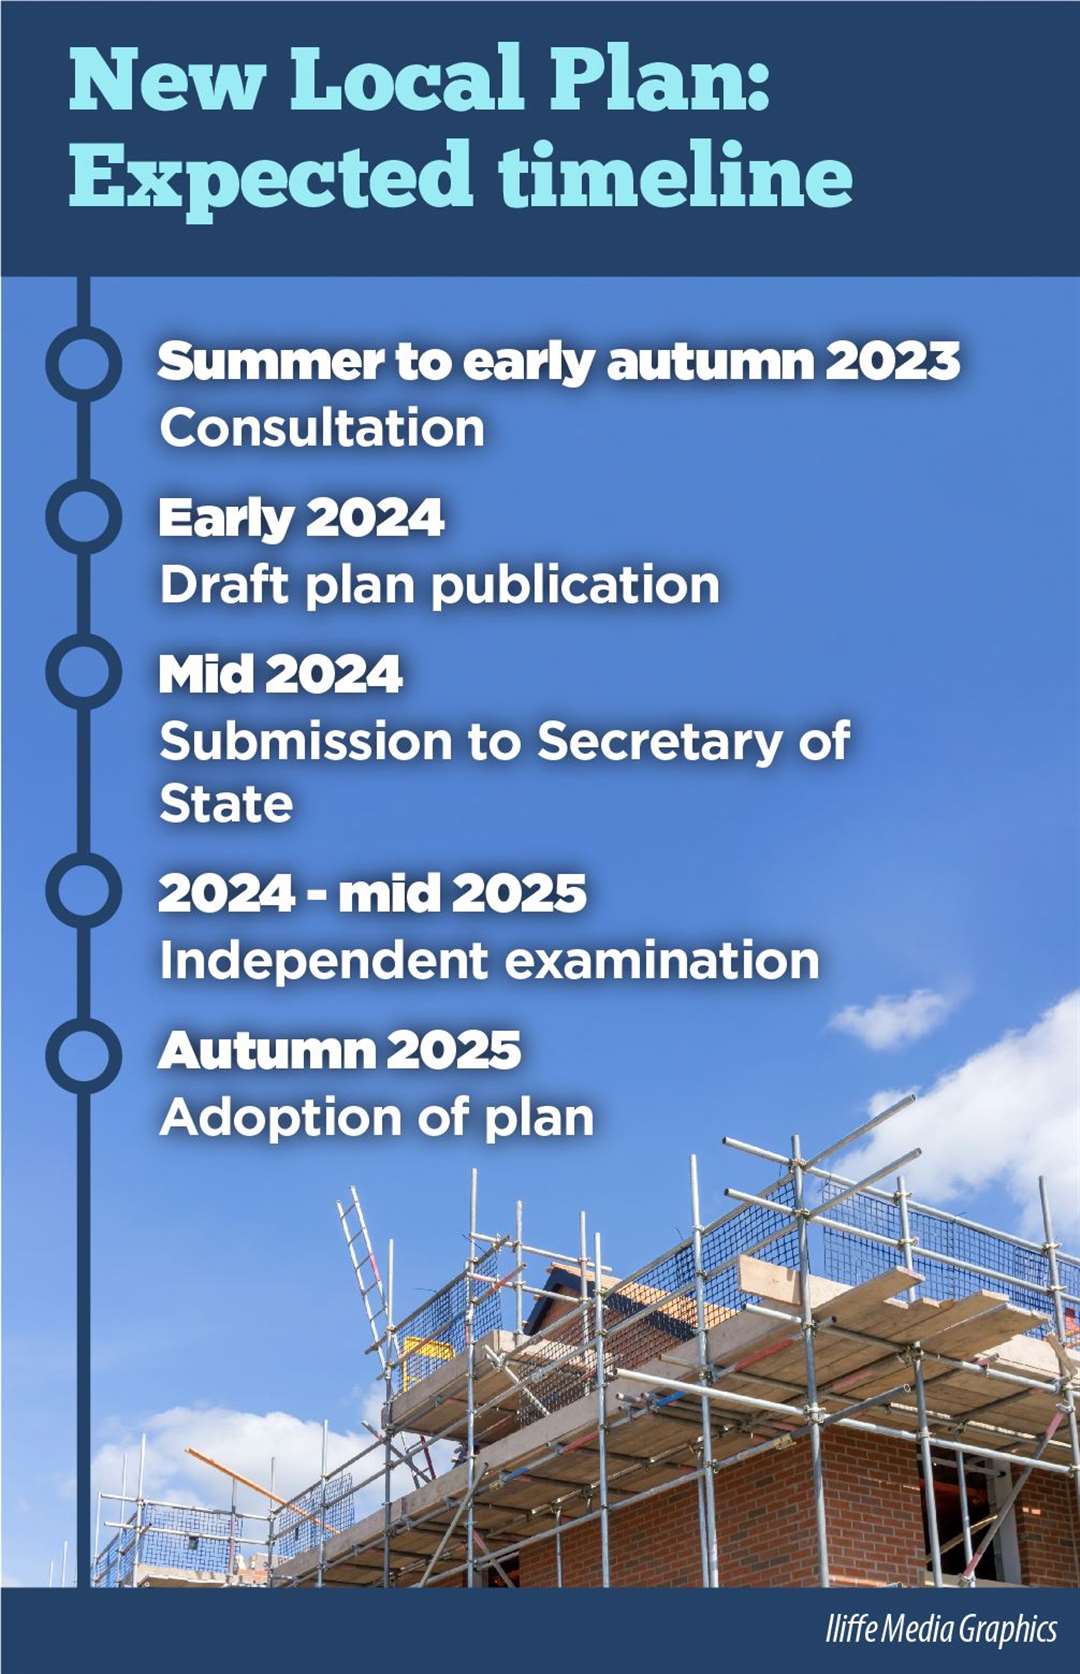 The new timeline for the Medway Local Plan